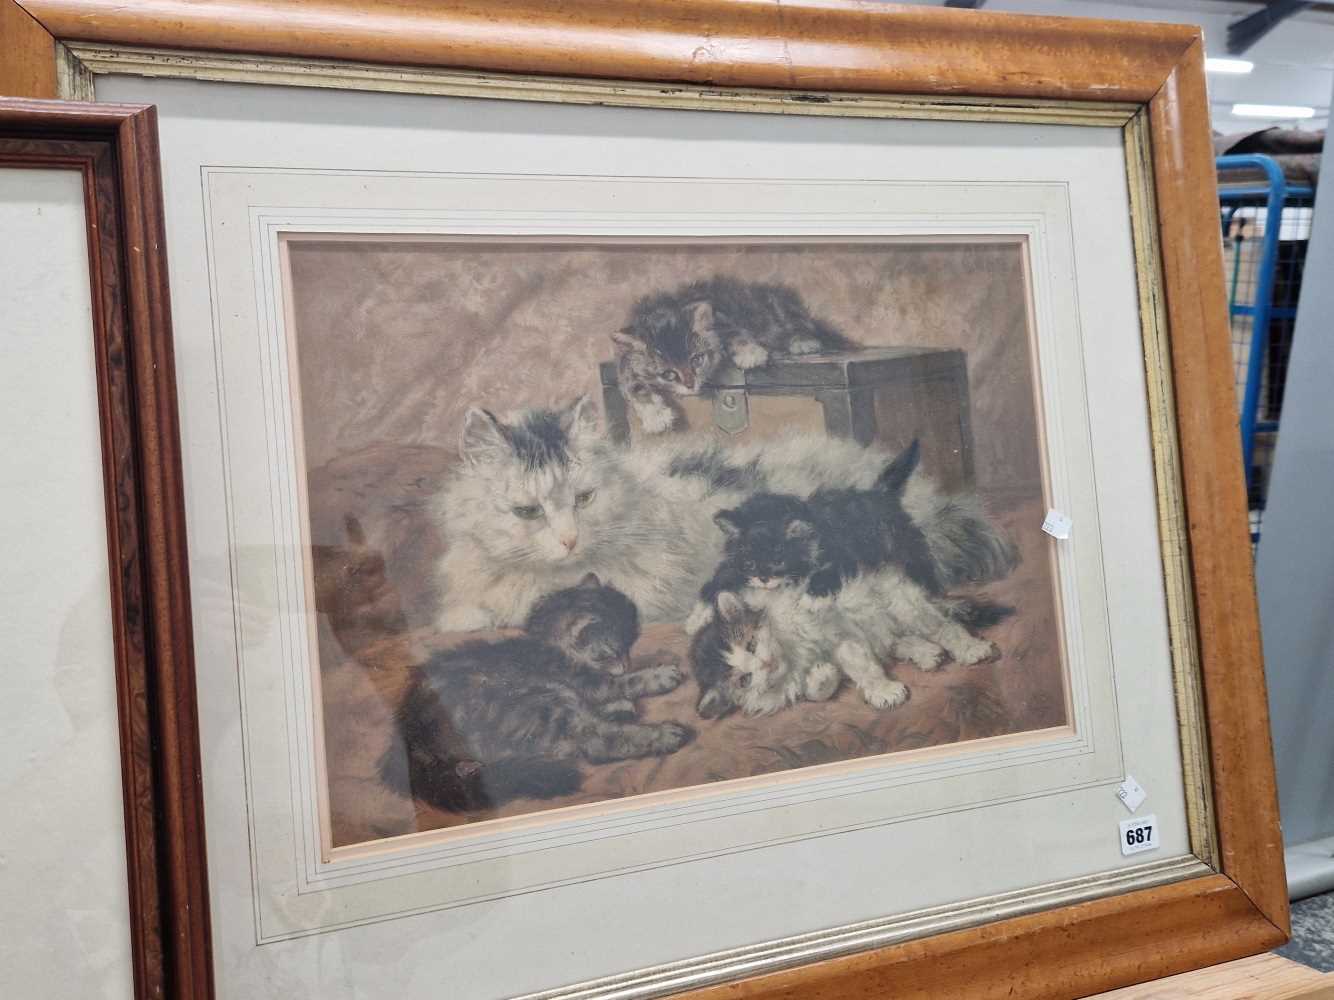 Victorian framed and glazed Pears print. Cats and kittens.